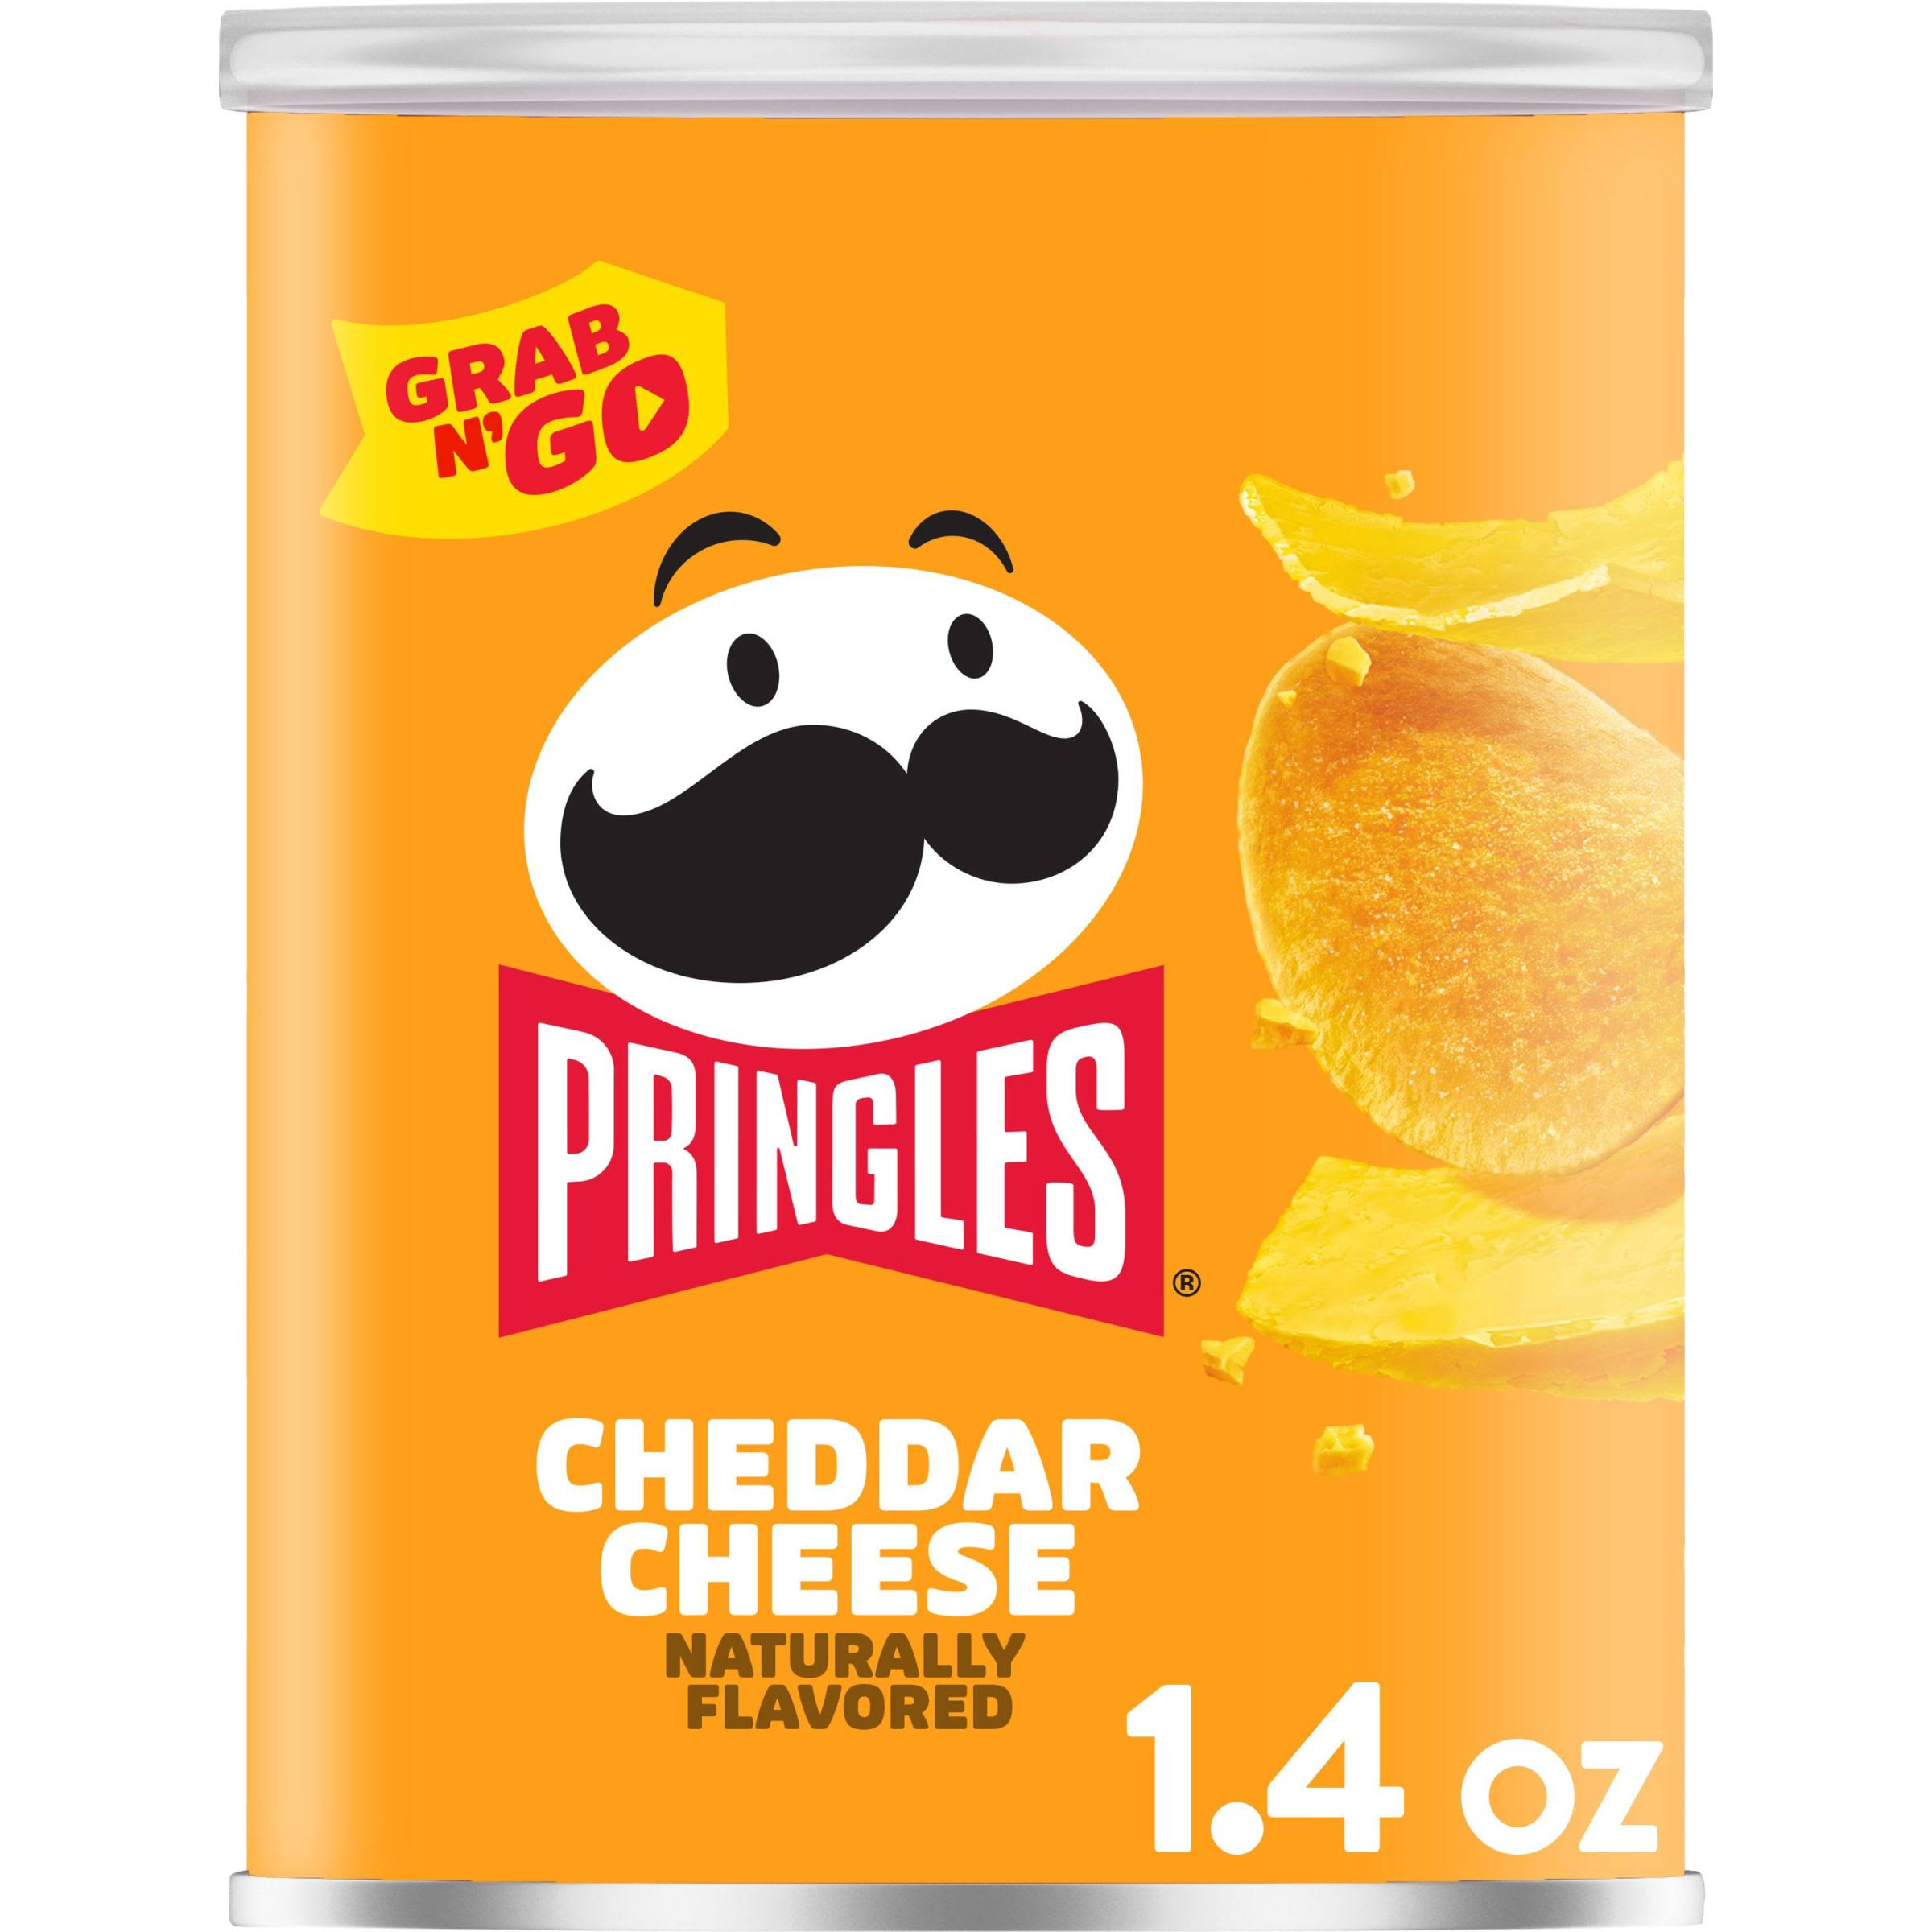 Pringles Potato Chips, Cheddar Cheese - 1.41 oz canister